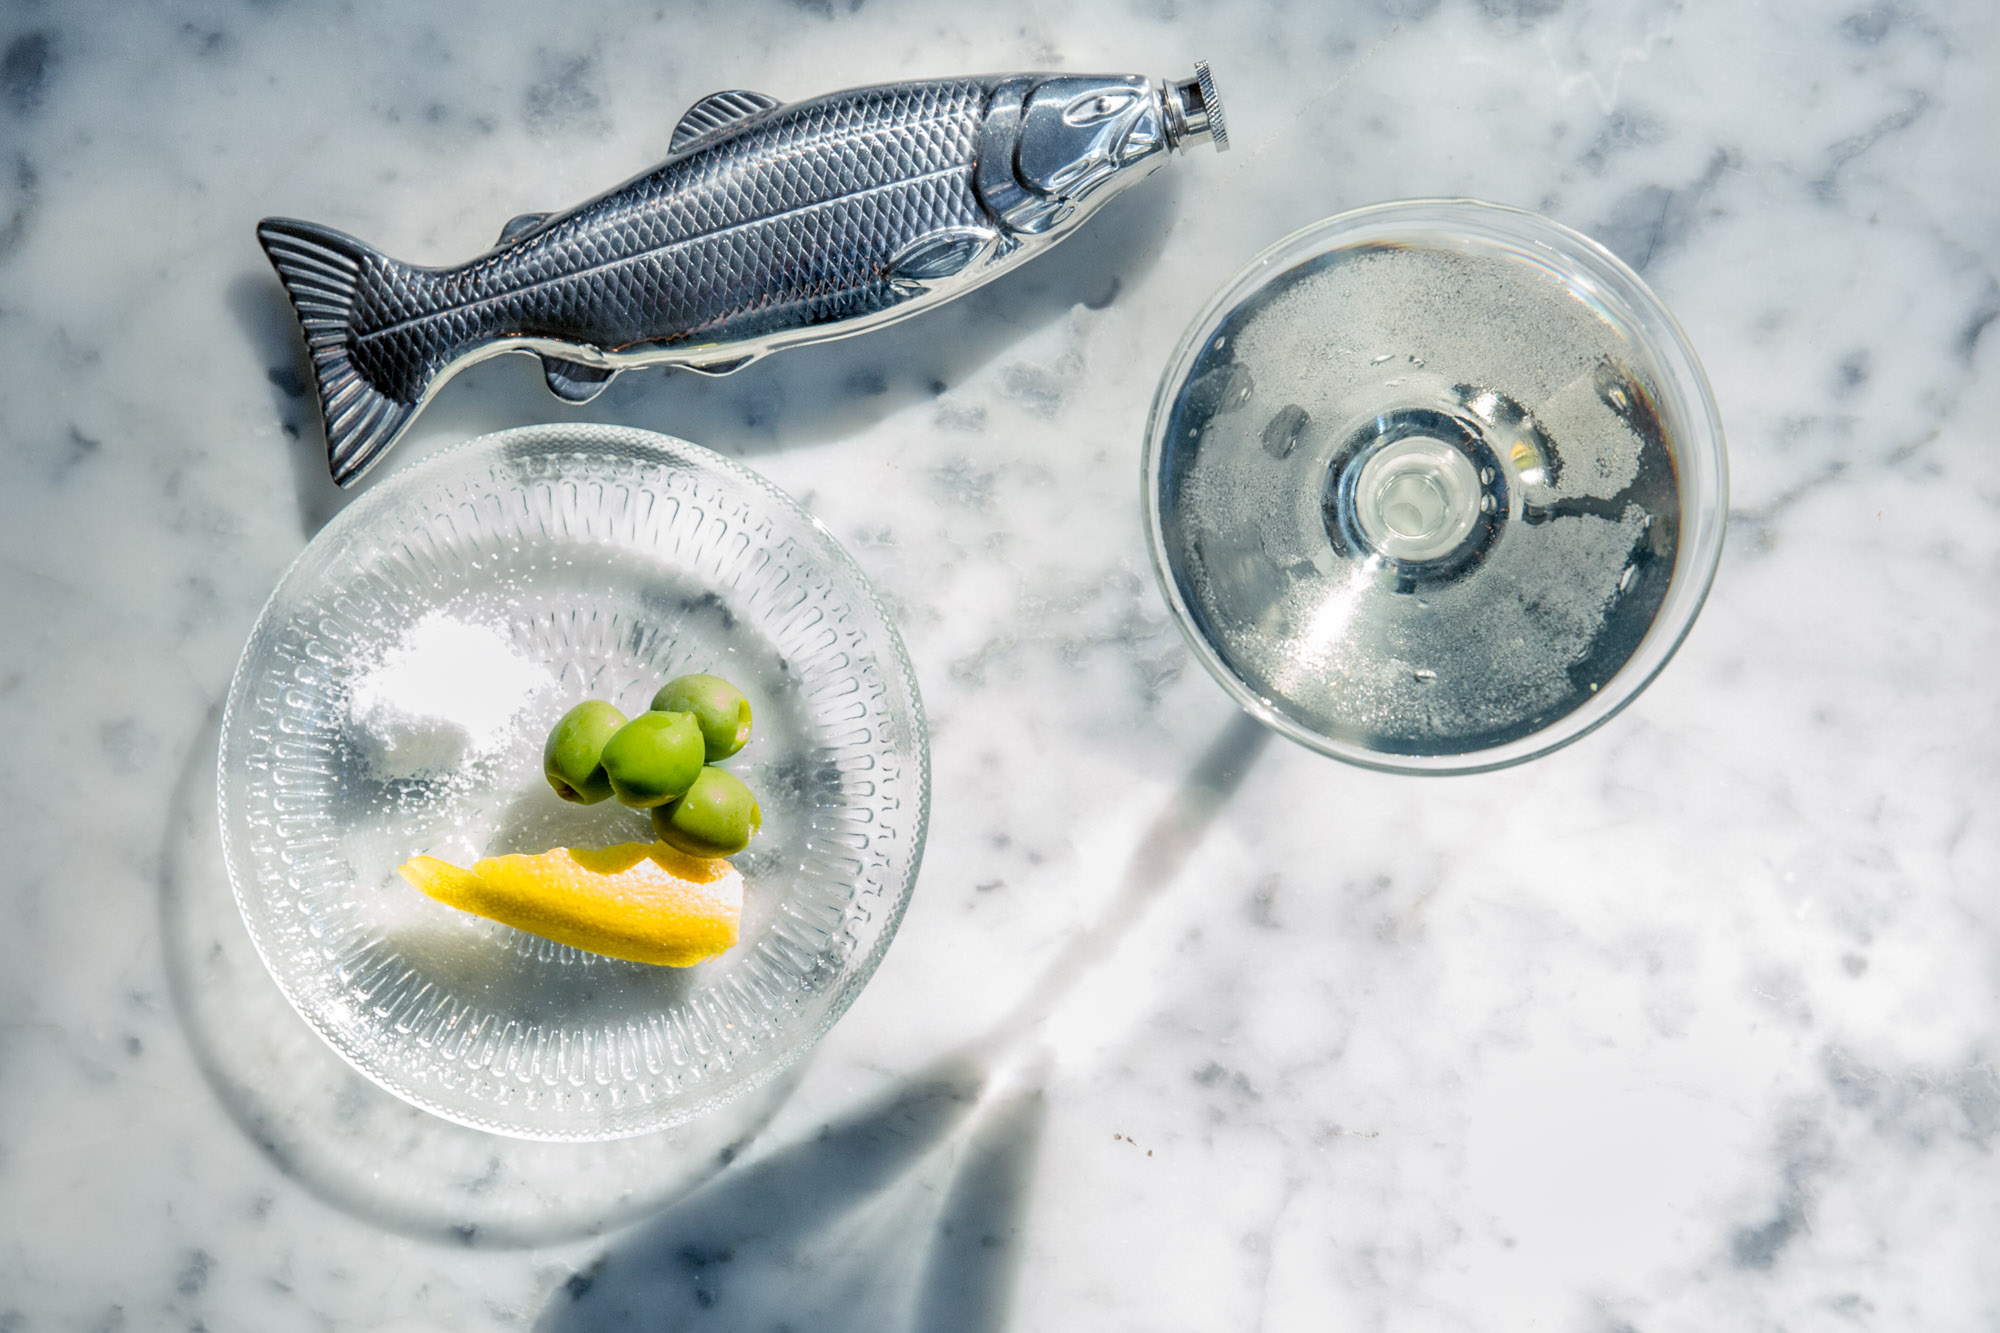 Martini served in a fish flask cocktail